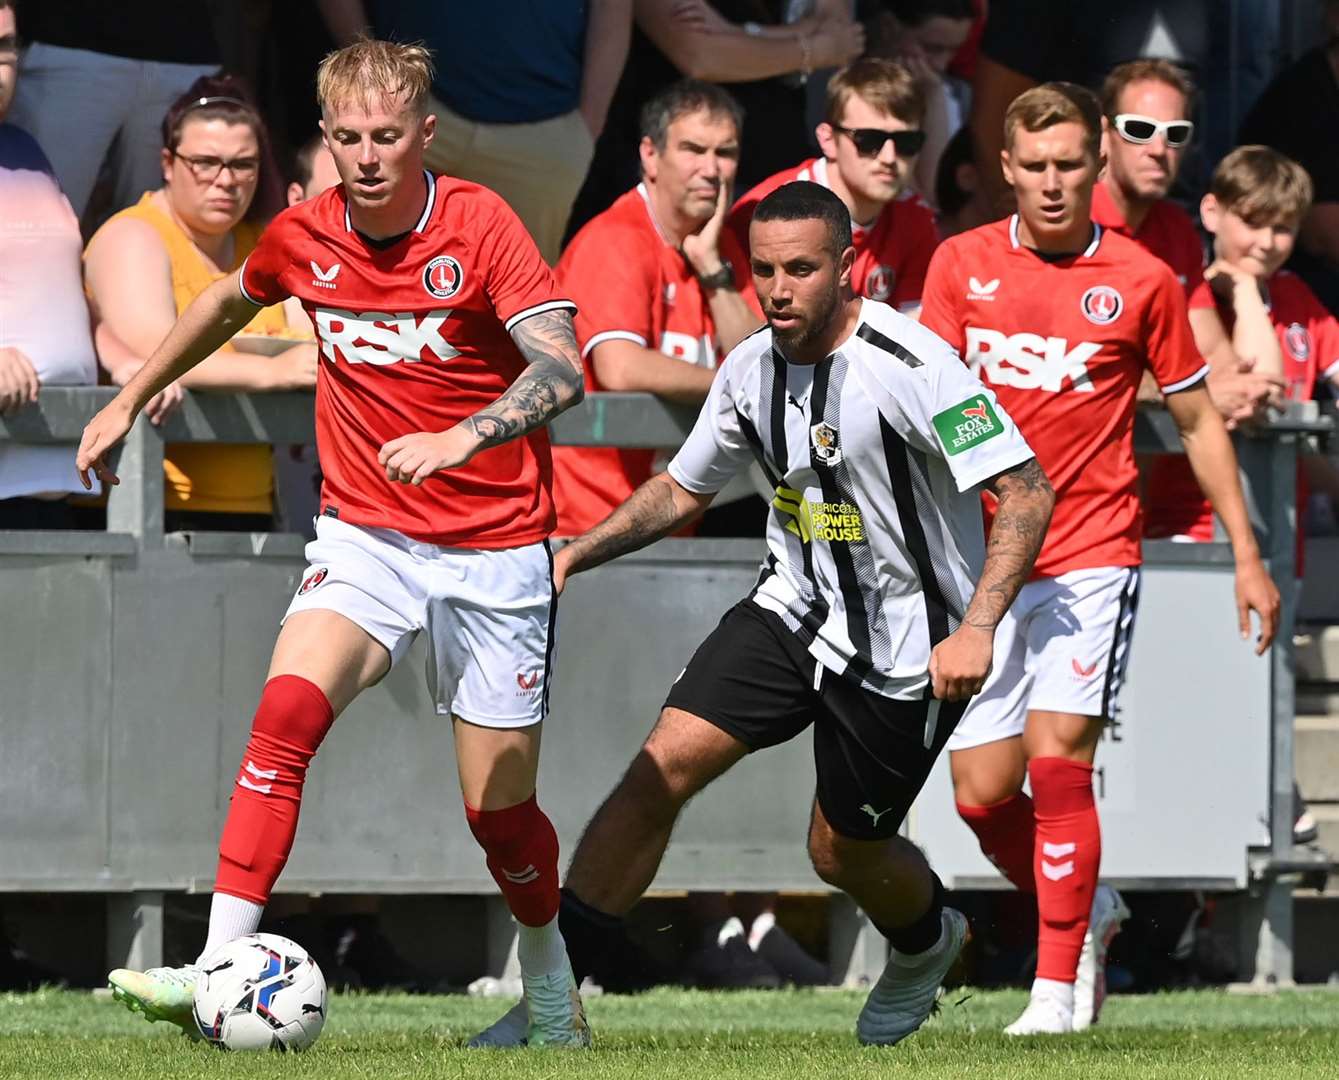 Dartford's Samir Carruthers aims to win back possession against Charlton in last Saturday's pre-season friendly. Picture: Keith Gillard